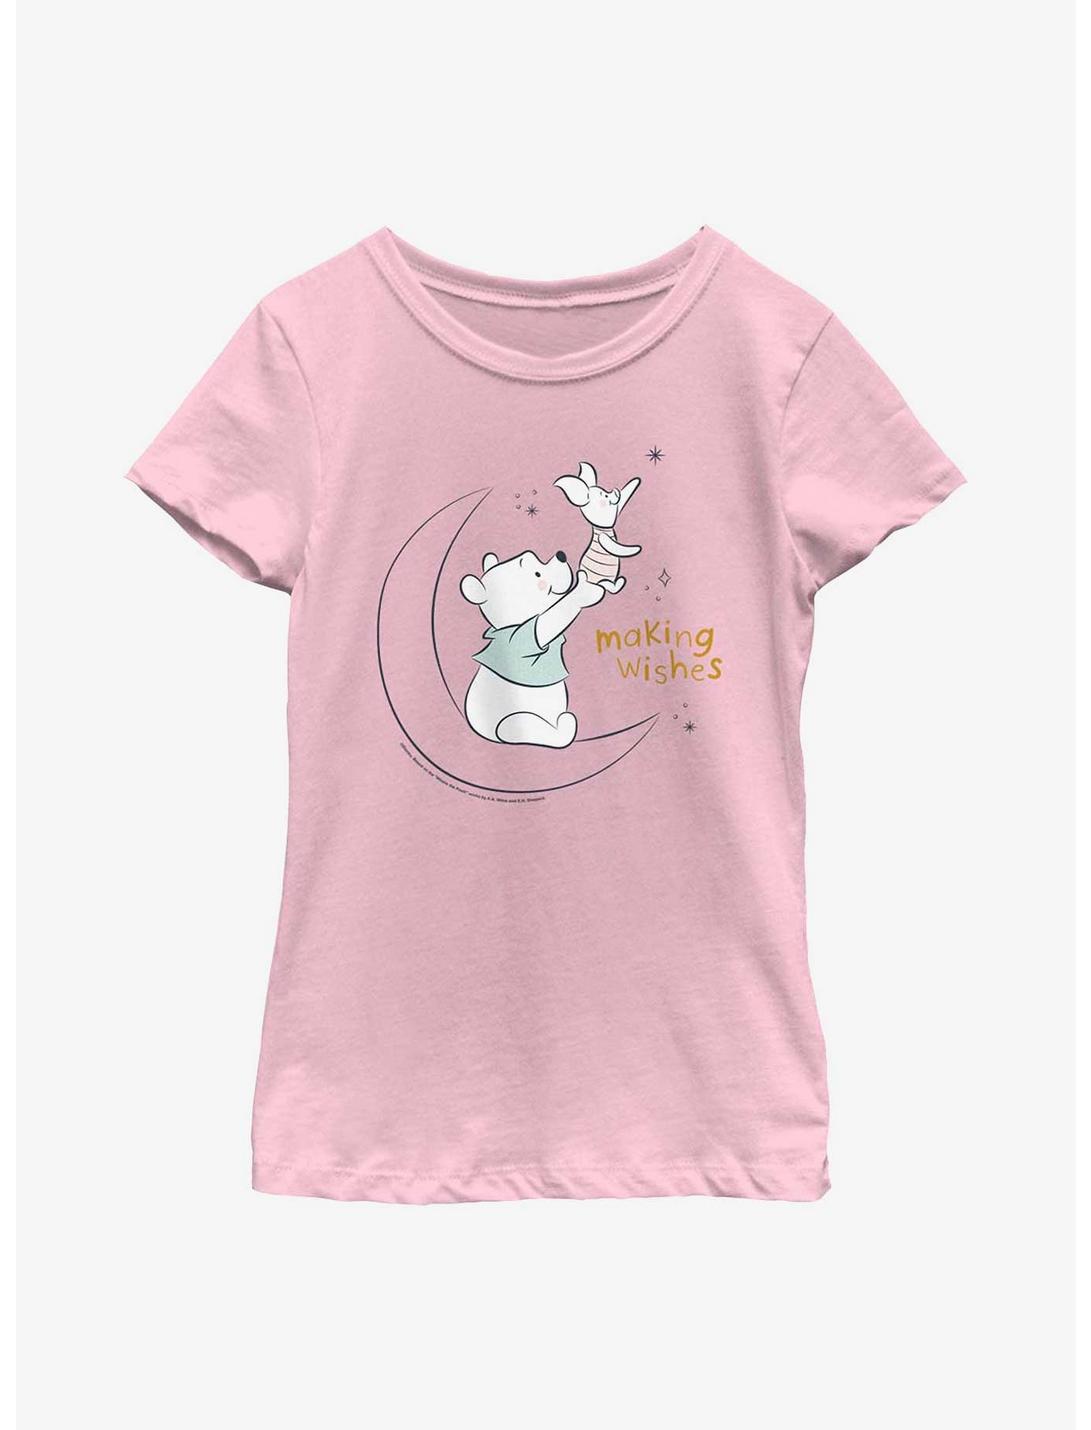 Disney Winnie The Pooh Making Wishes Youth Girls T-Shirt, PINK, hi-res